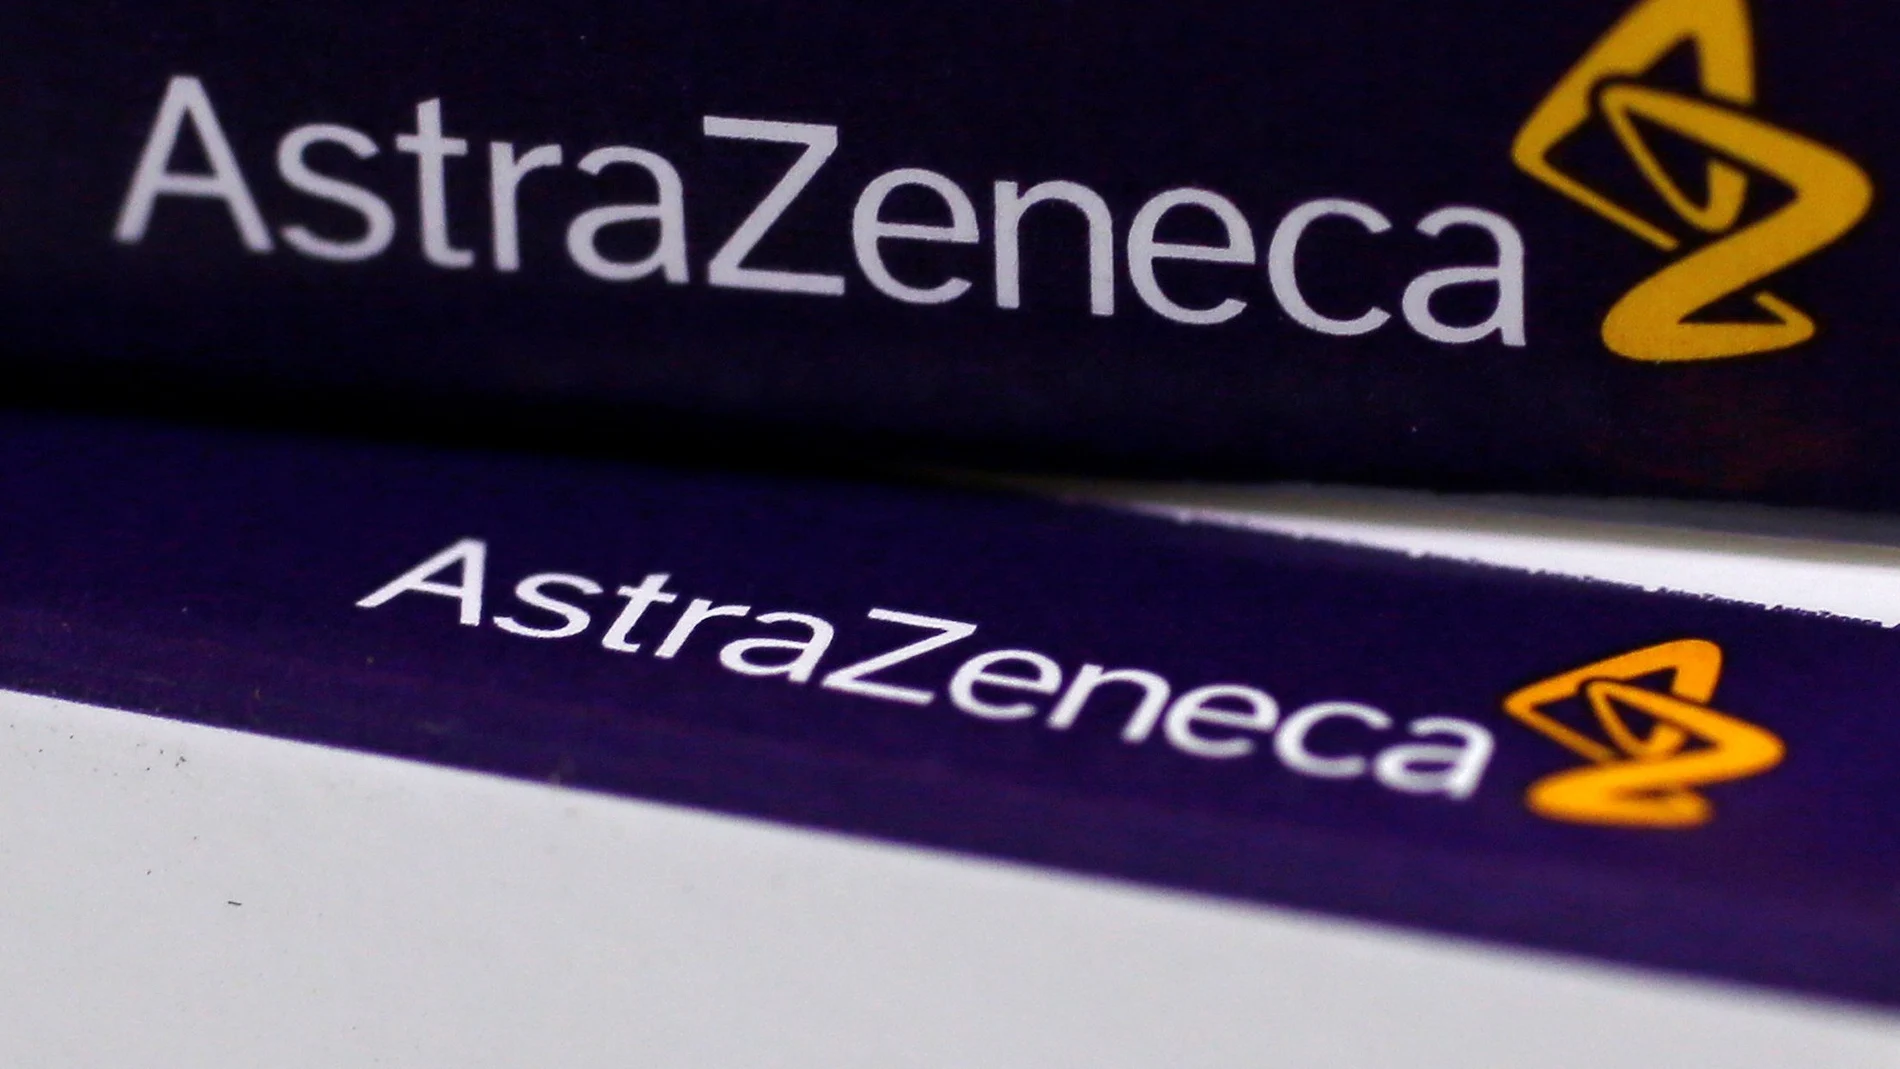 FILE PHOTO: AstraZeneca's logo is seen on medication packages in a pharmacy in London